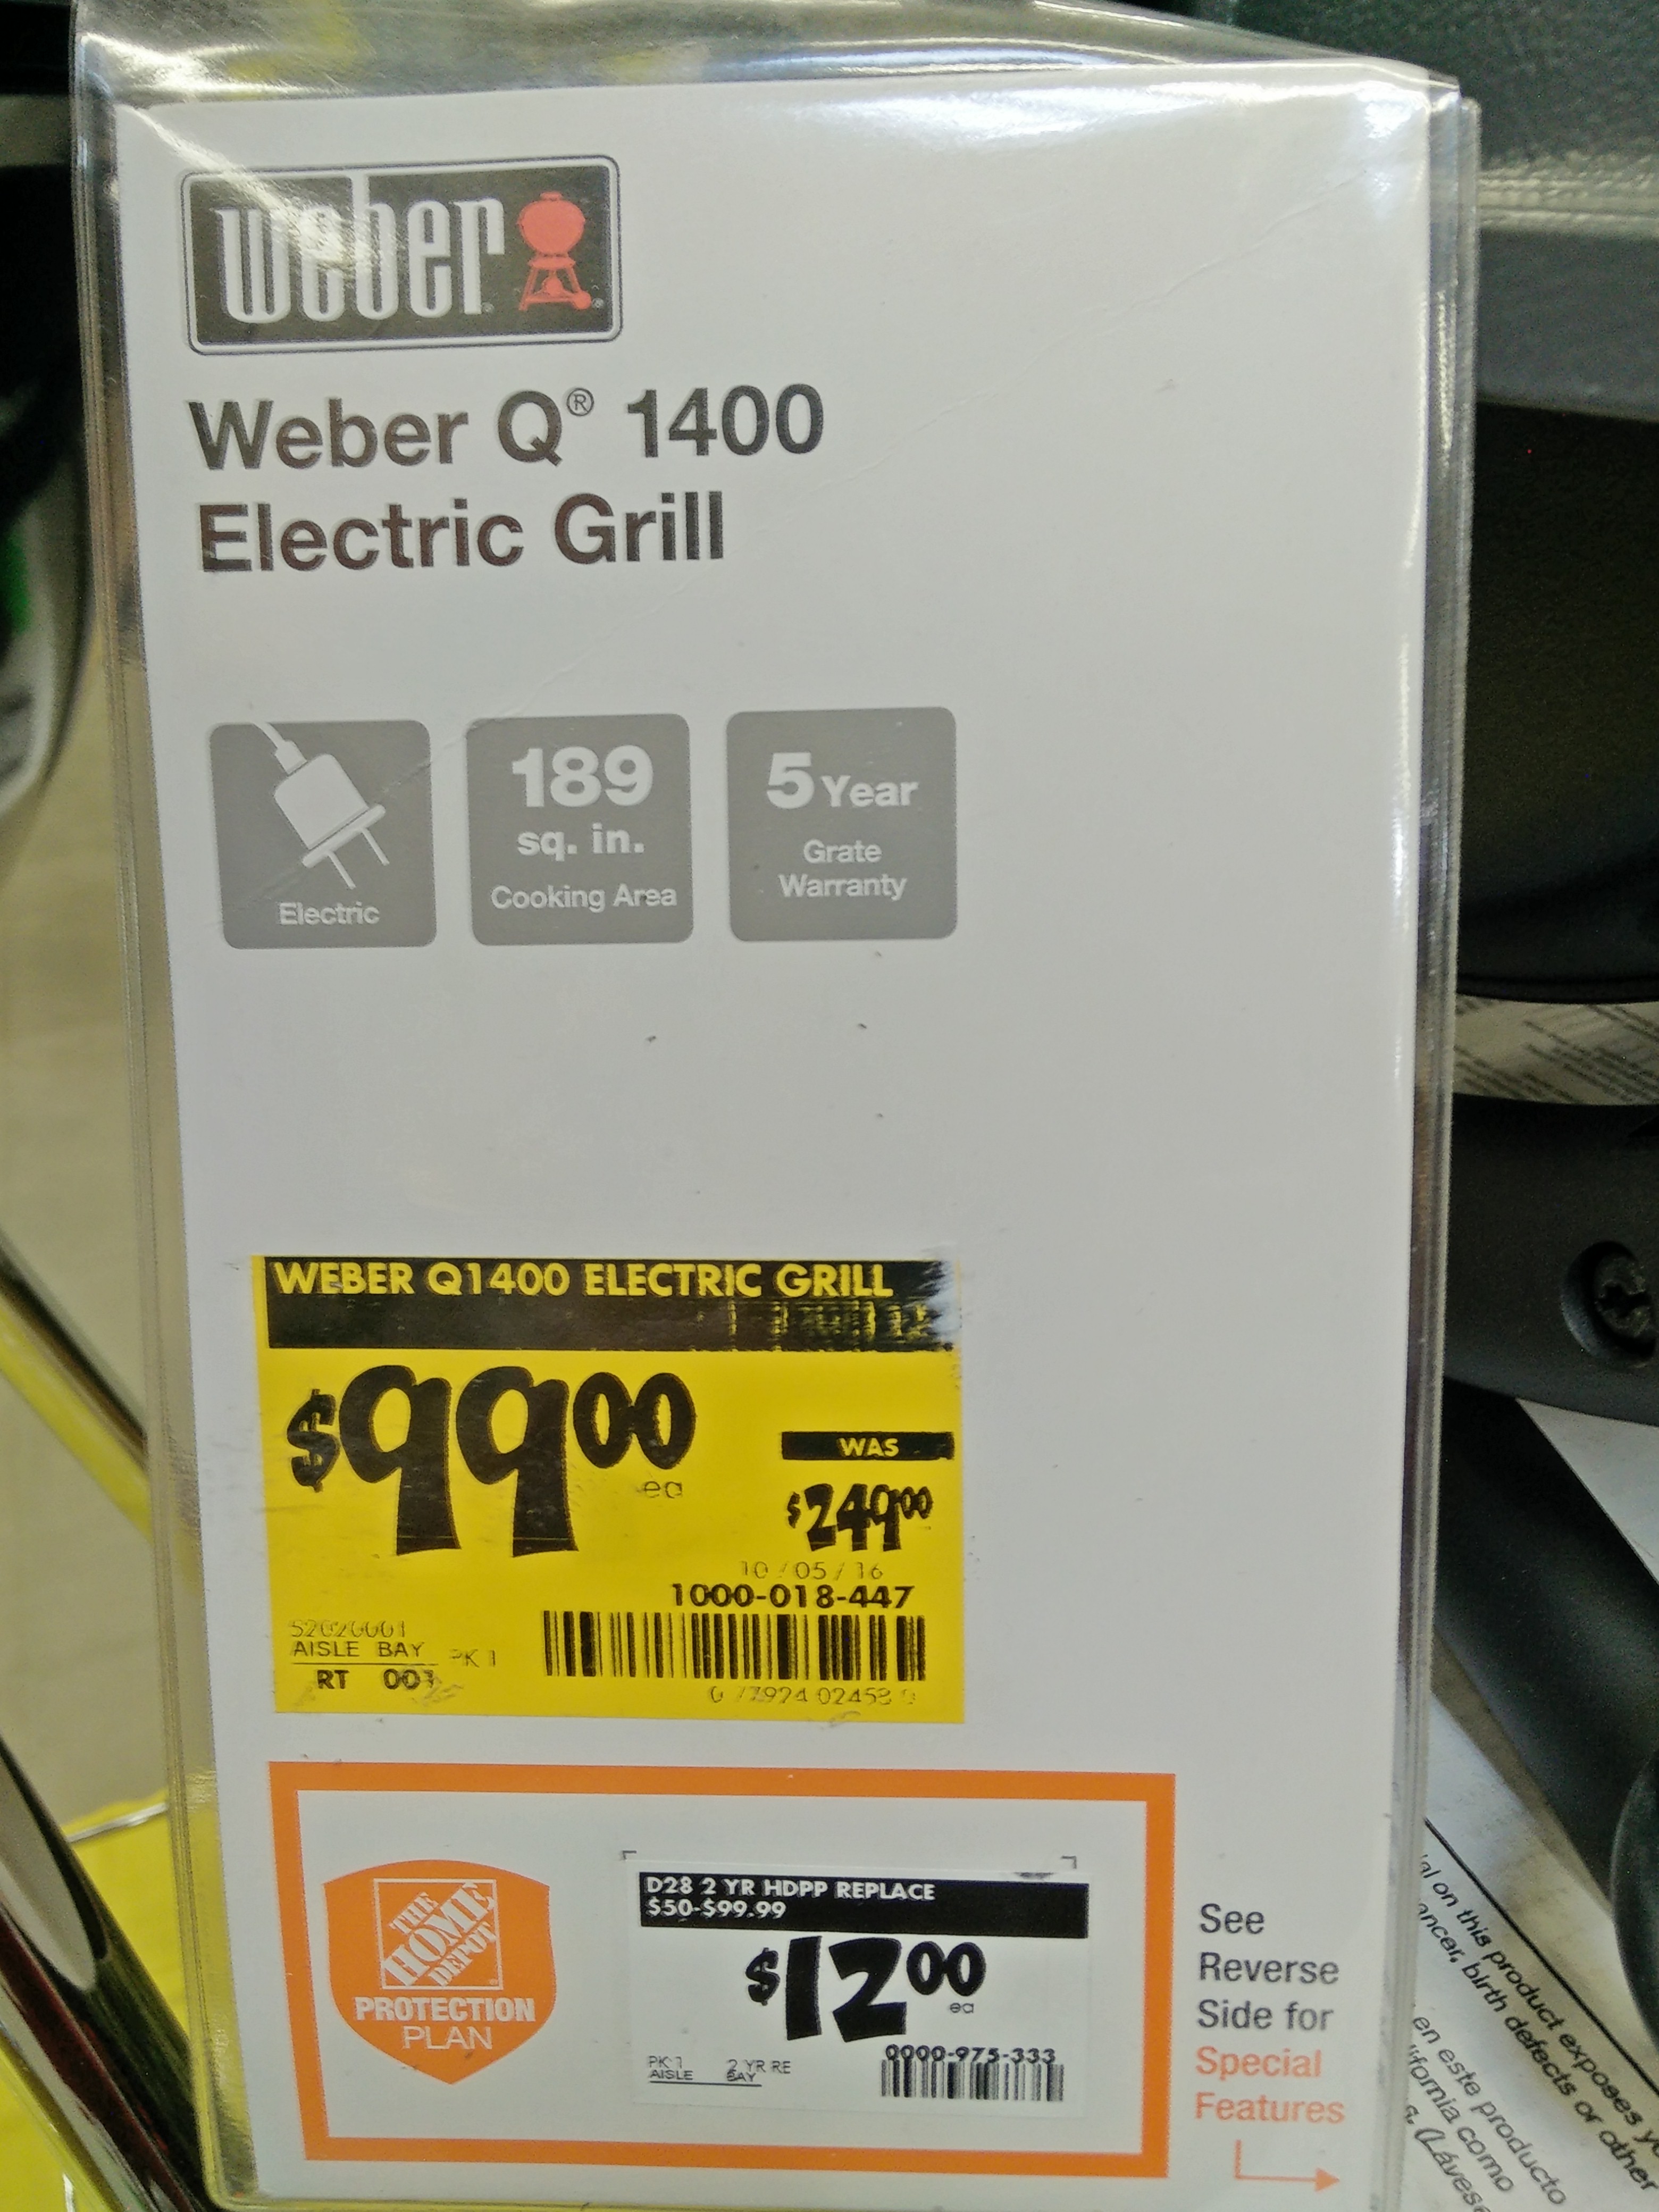 Clearance YMMV Weber Q 1400 Portable Electric Grill $99 orig $249